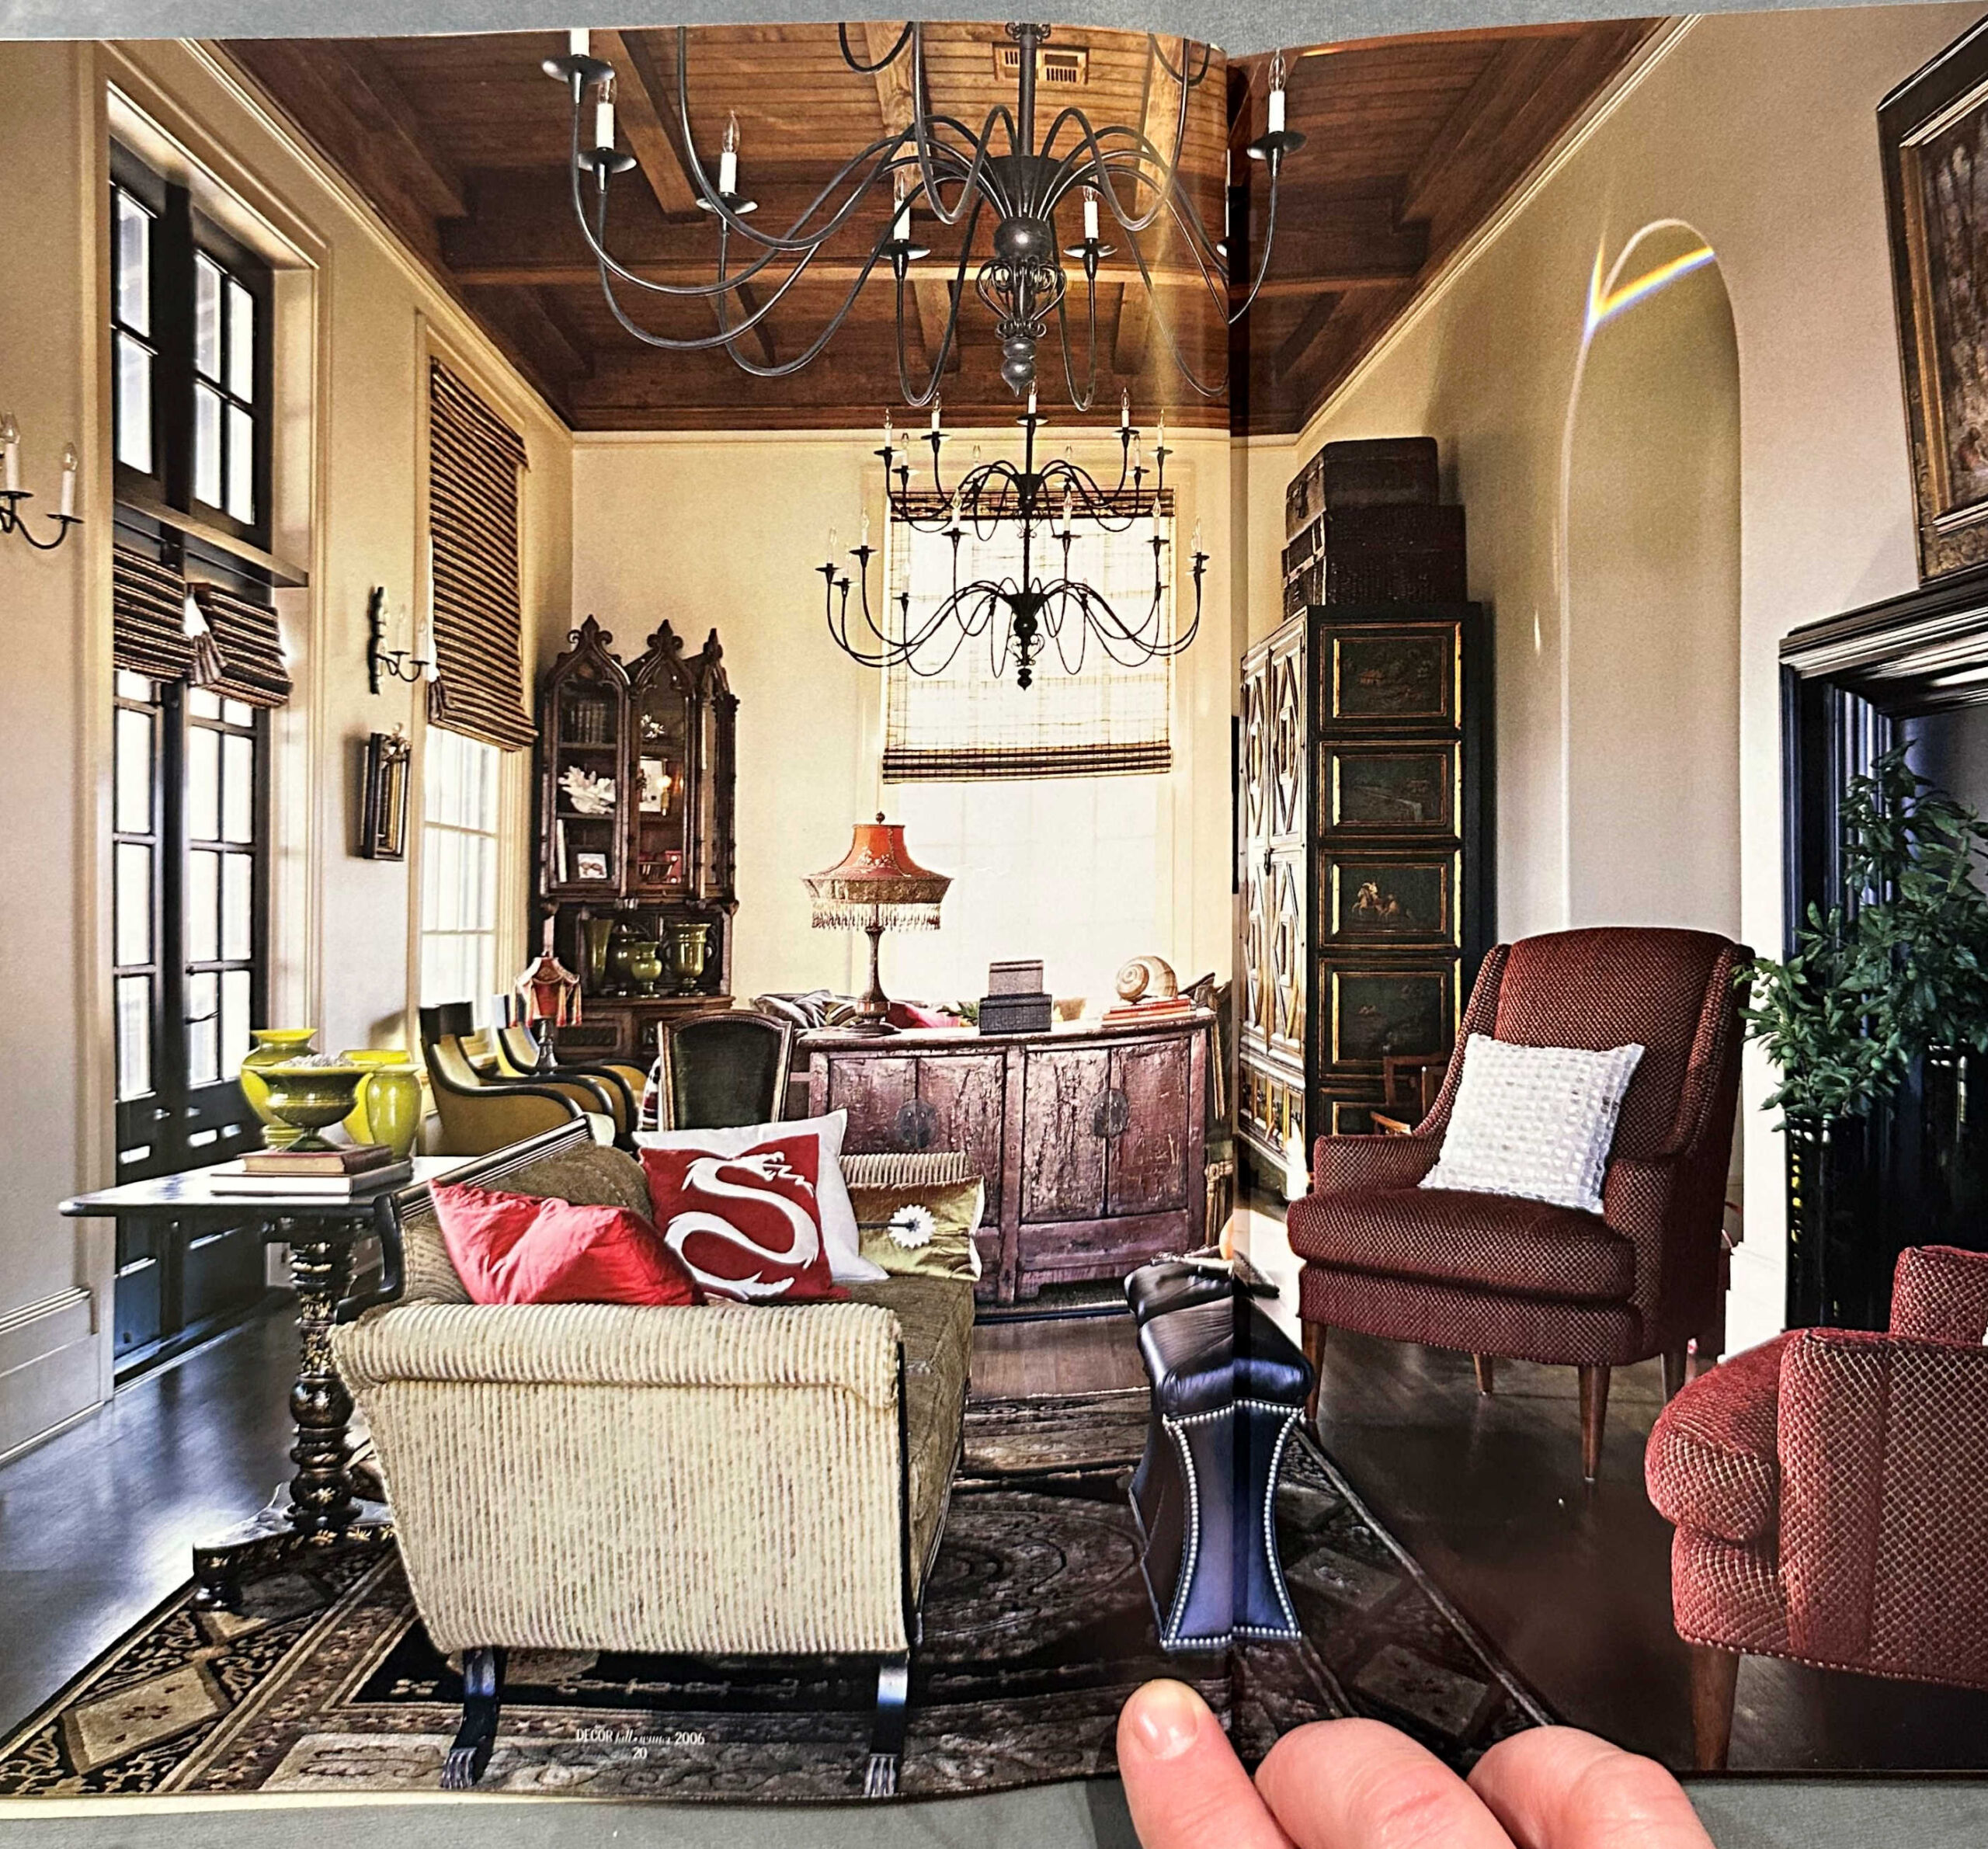 Living room design from 2006. Is this timeless living room design in 2023?